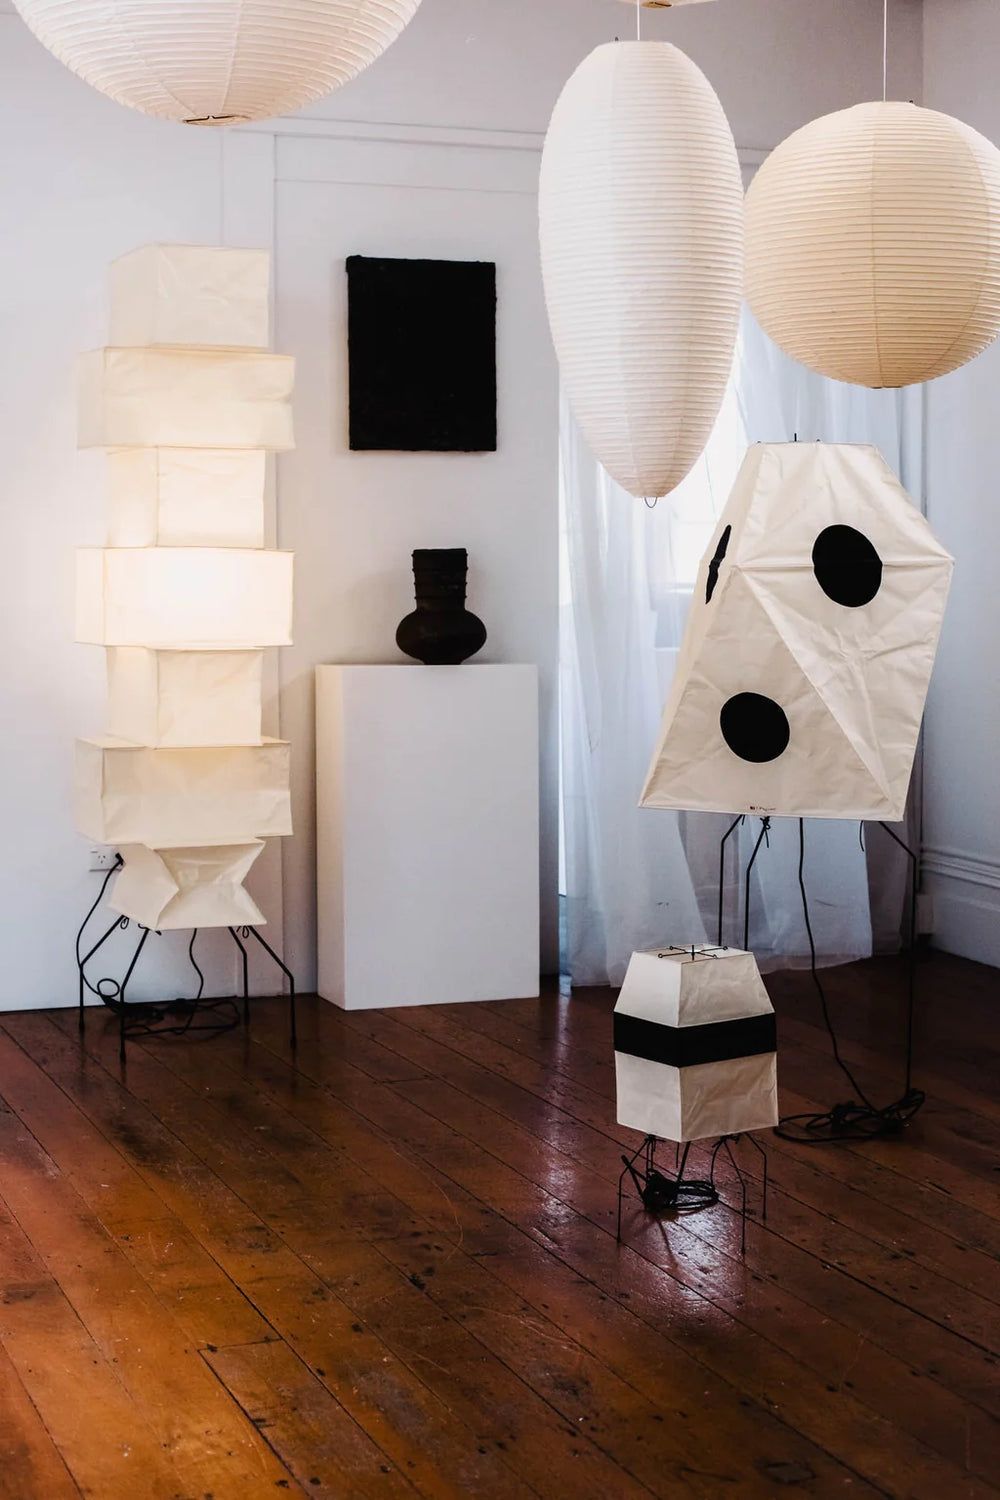 Floor Lamps Made Of Rice Paper Stylish and Eco-Friendly Lighting Option: Rice Paper Floor Lamps for a Modern Home